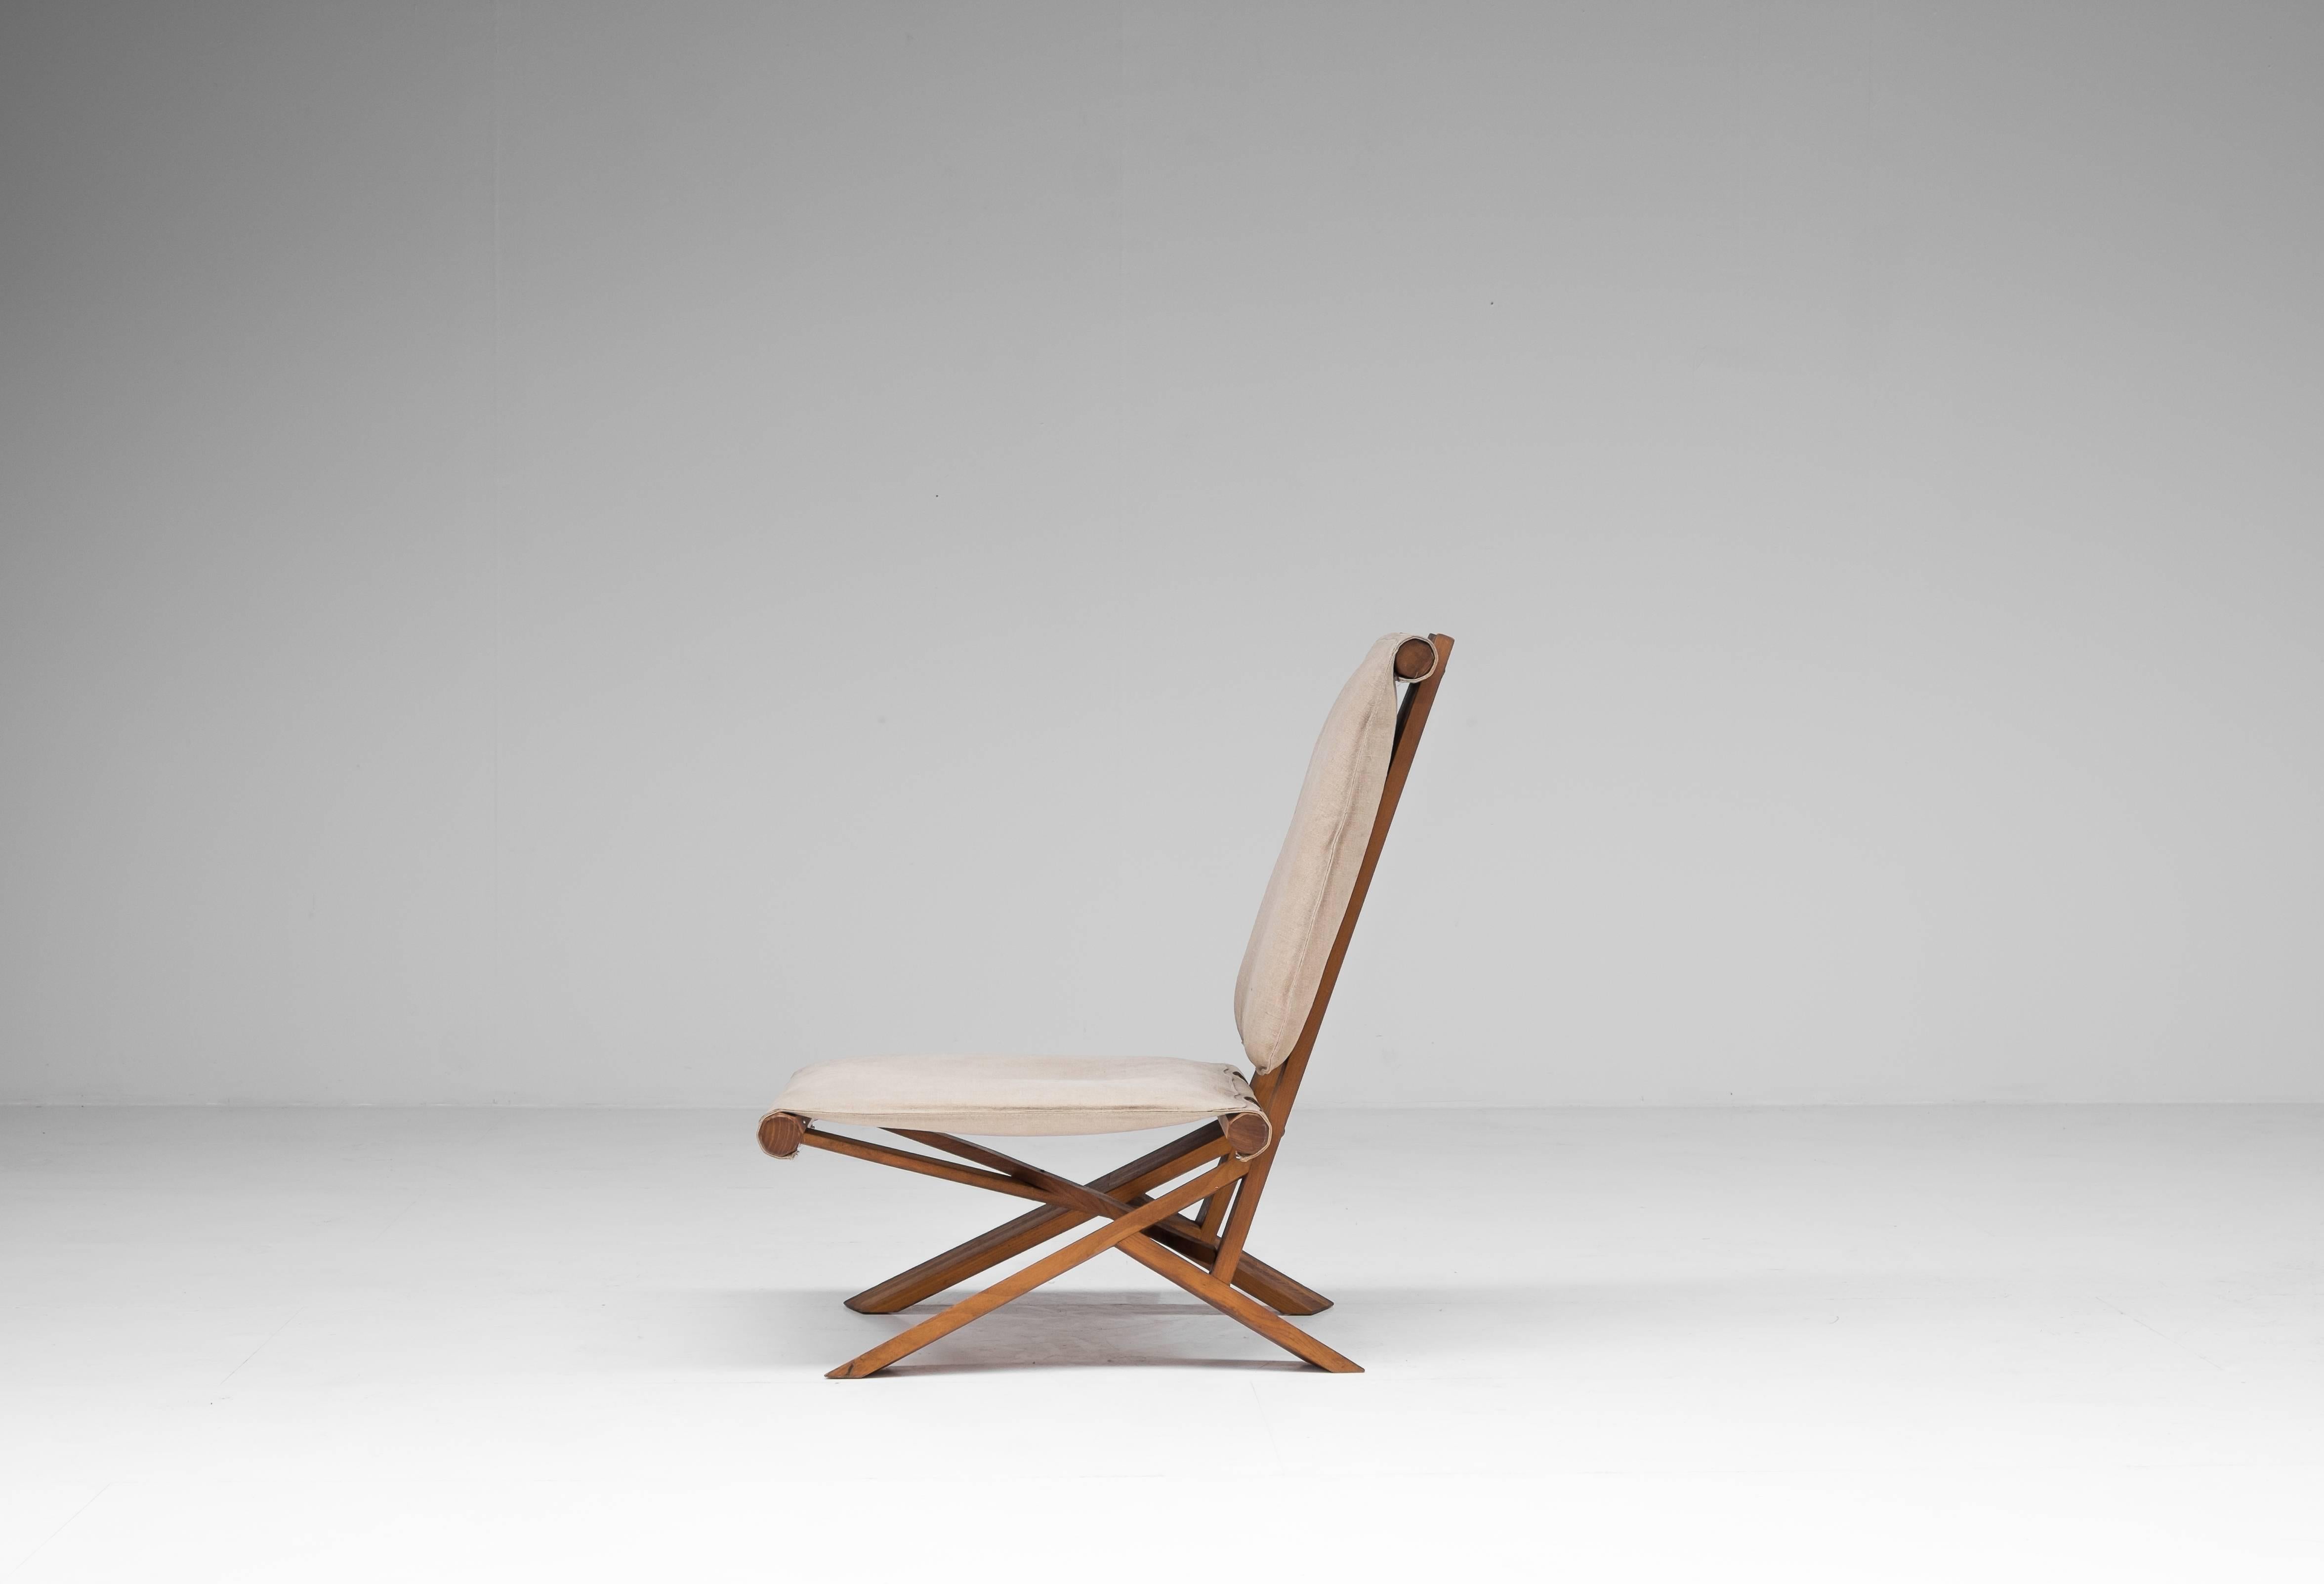 The S46 Dromadaire chair was designed by Pierre Chapo and was produced in France by Ebenisterie Seltz, circa 1980. The frame is made from elm with a canvas upholstery. The weight and shape of the structure of this piece determine its equilibrium and